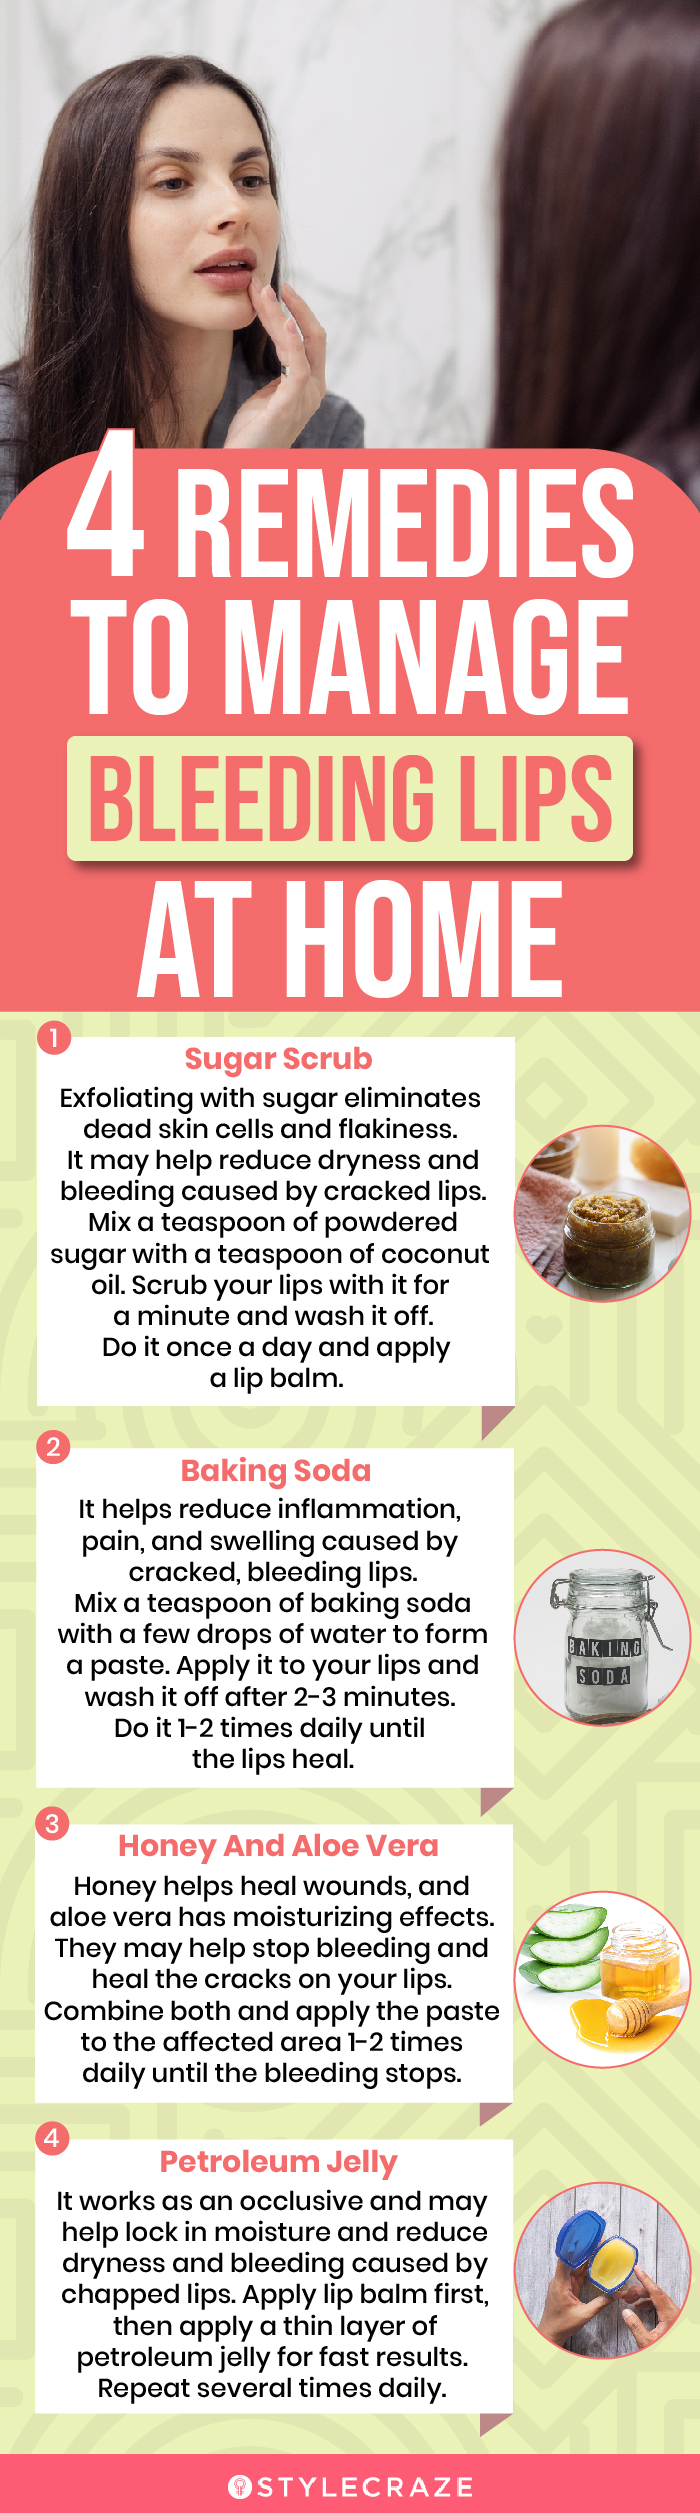 lip bleeding diy and medical treatments (infographic)